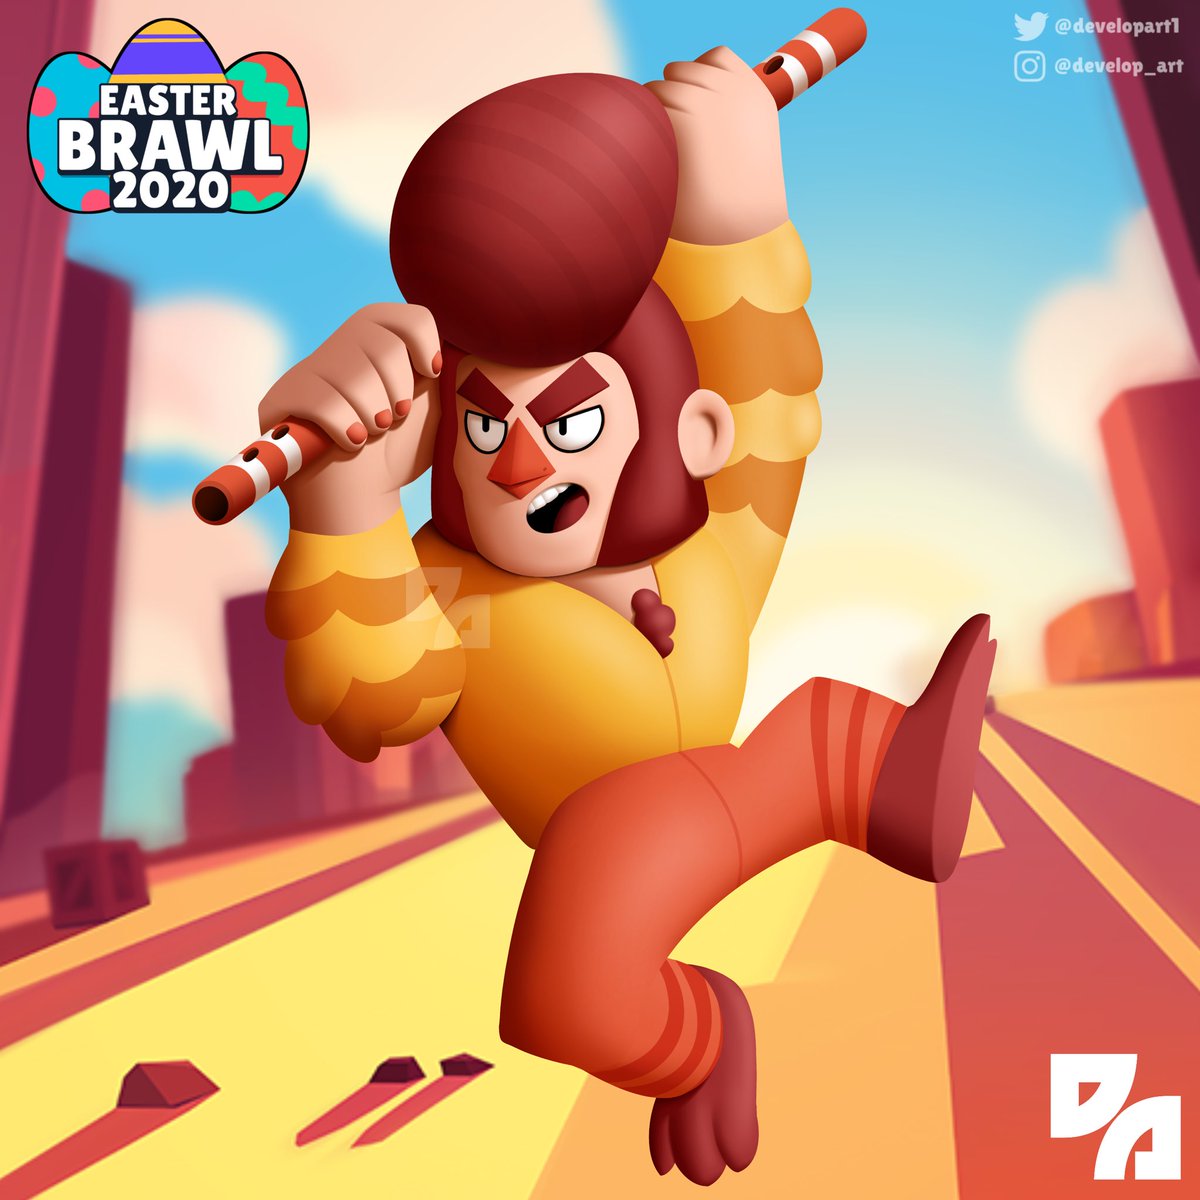 Dev On Twitter Kukarebull Fun Skin For Easterbrawl Collaboration Kukareku Is The Sound Roosters Make In Russian Huge Thanks To Chii 2016 For Helping And Explaining Pose And Proportions Easterbrawl2020 Brawlstars Brawlstarsart - t pose brawl stars